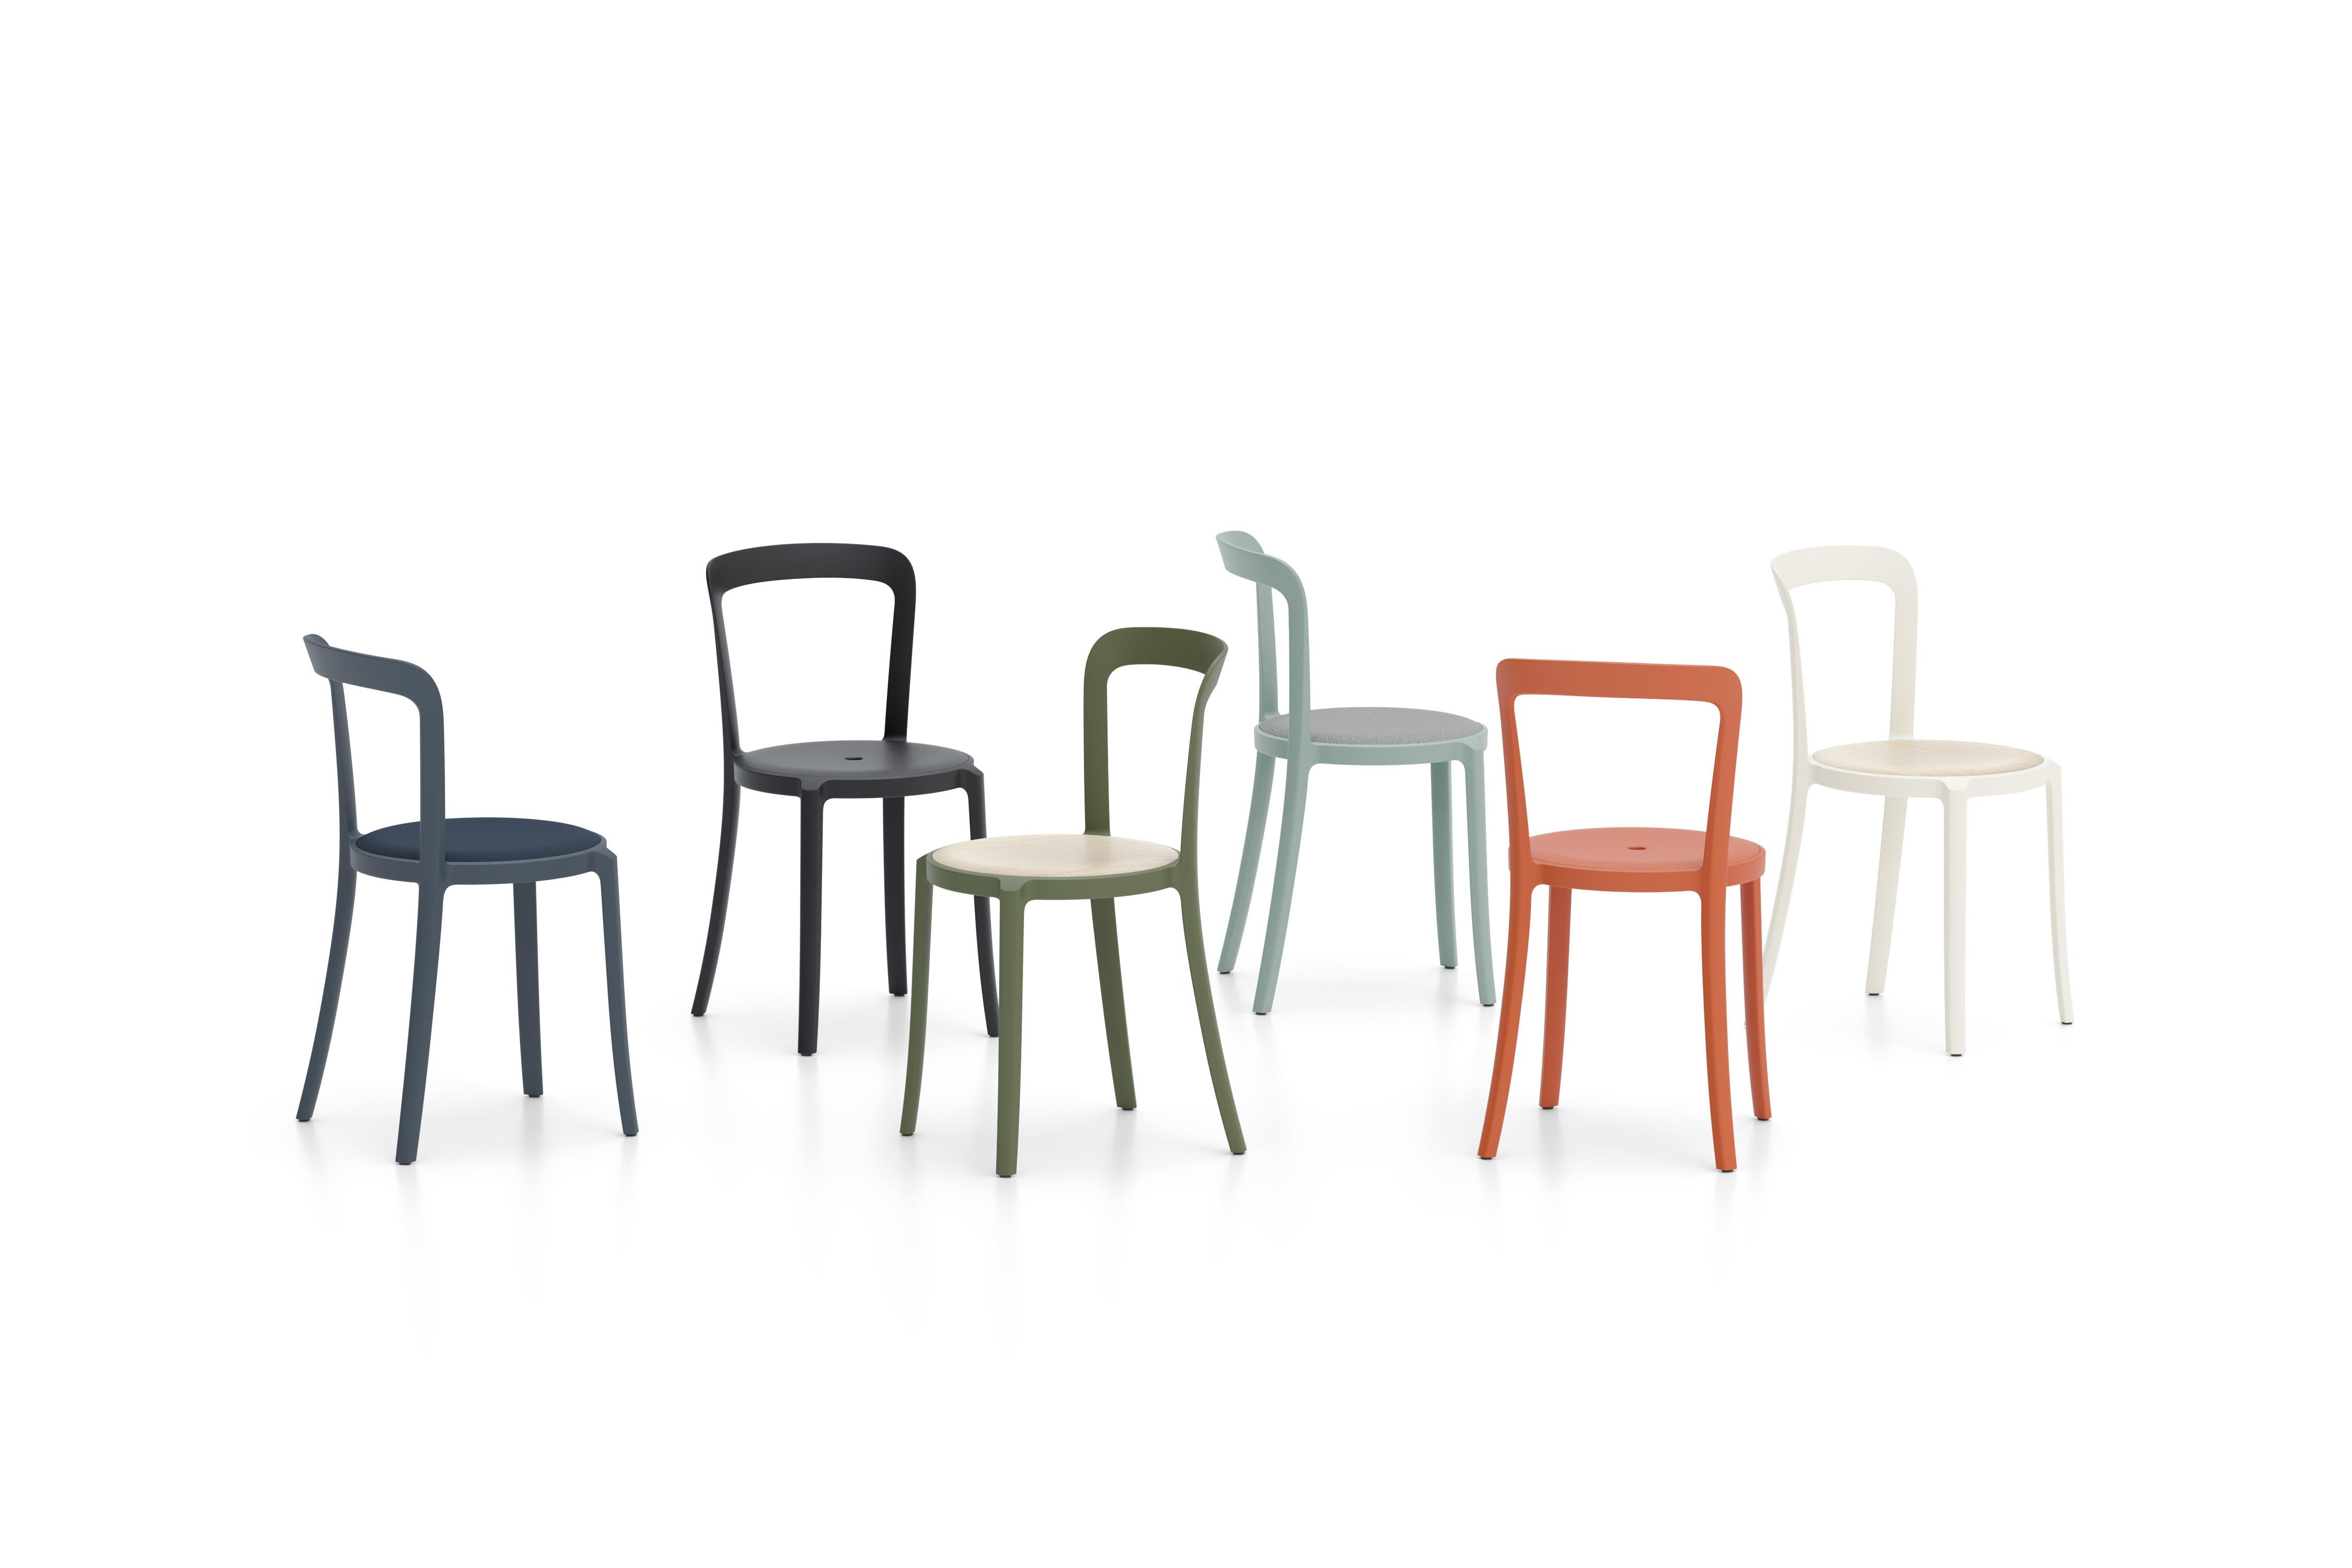 Contemporary On & On Stacking Chair in Plastic with White Frame by Barber & Osgerby